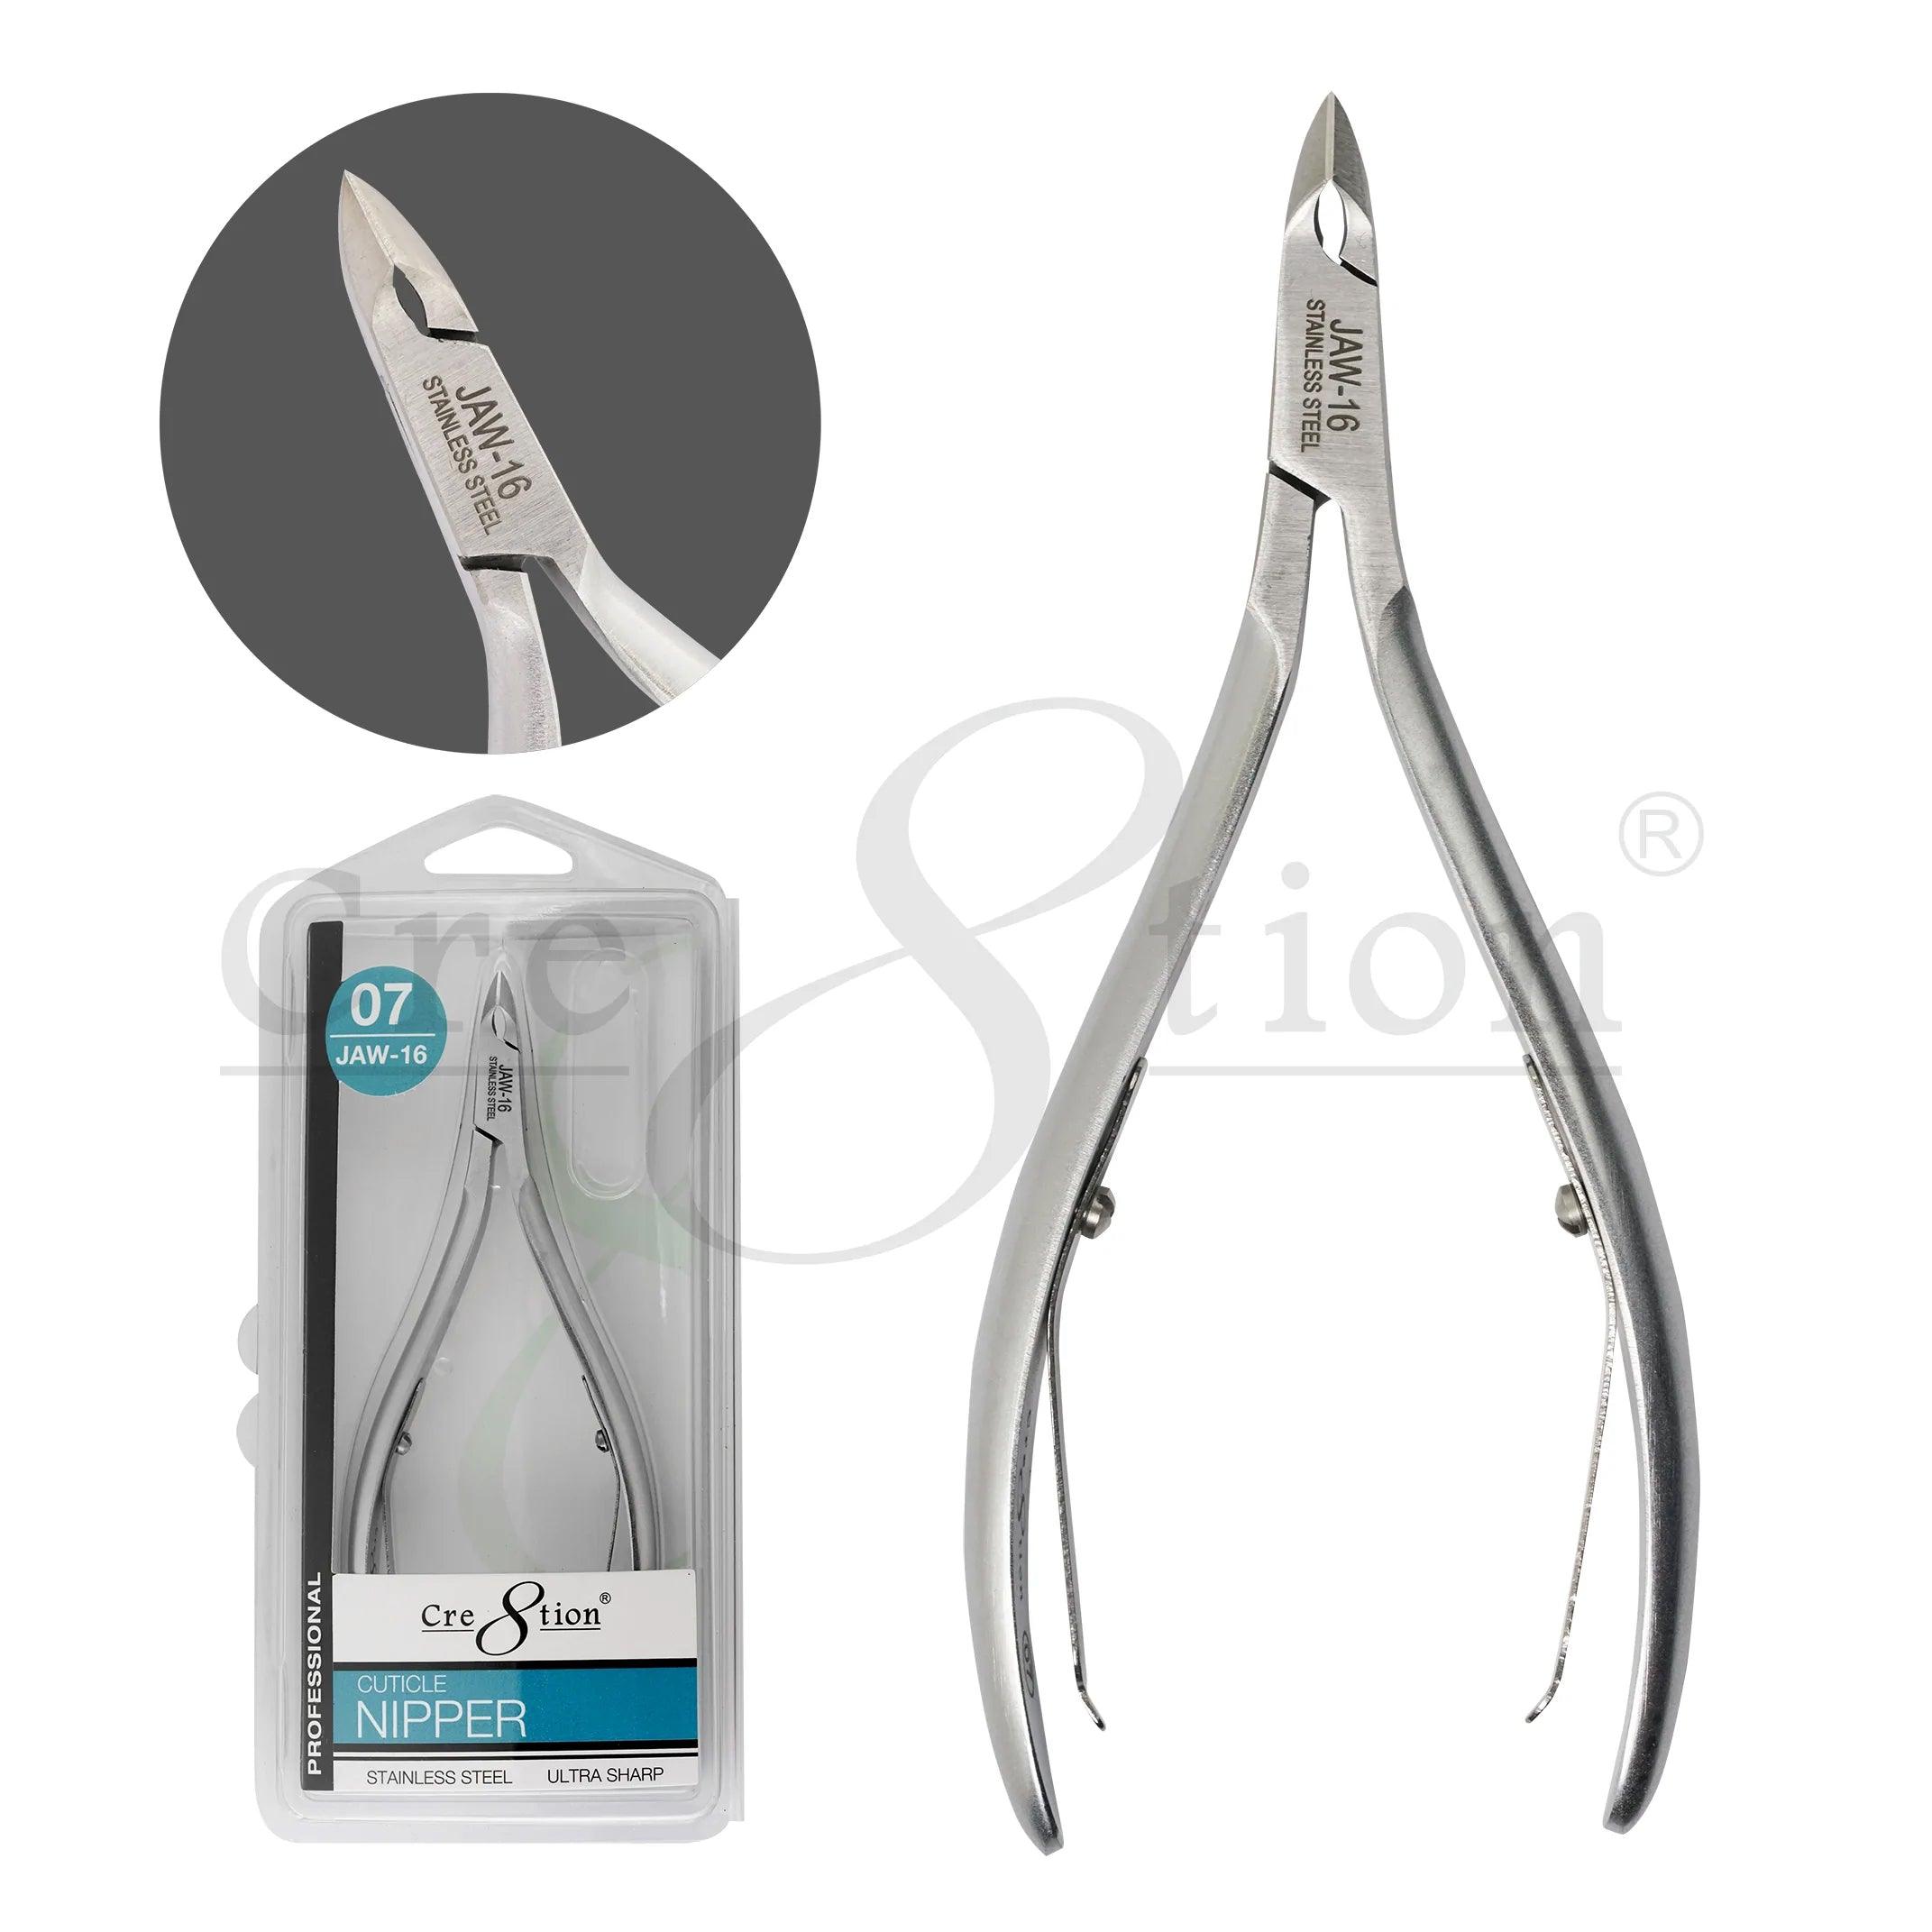 Cre8tion Stainless Steel Cuticle Nipper #07 Jaw 16